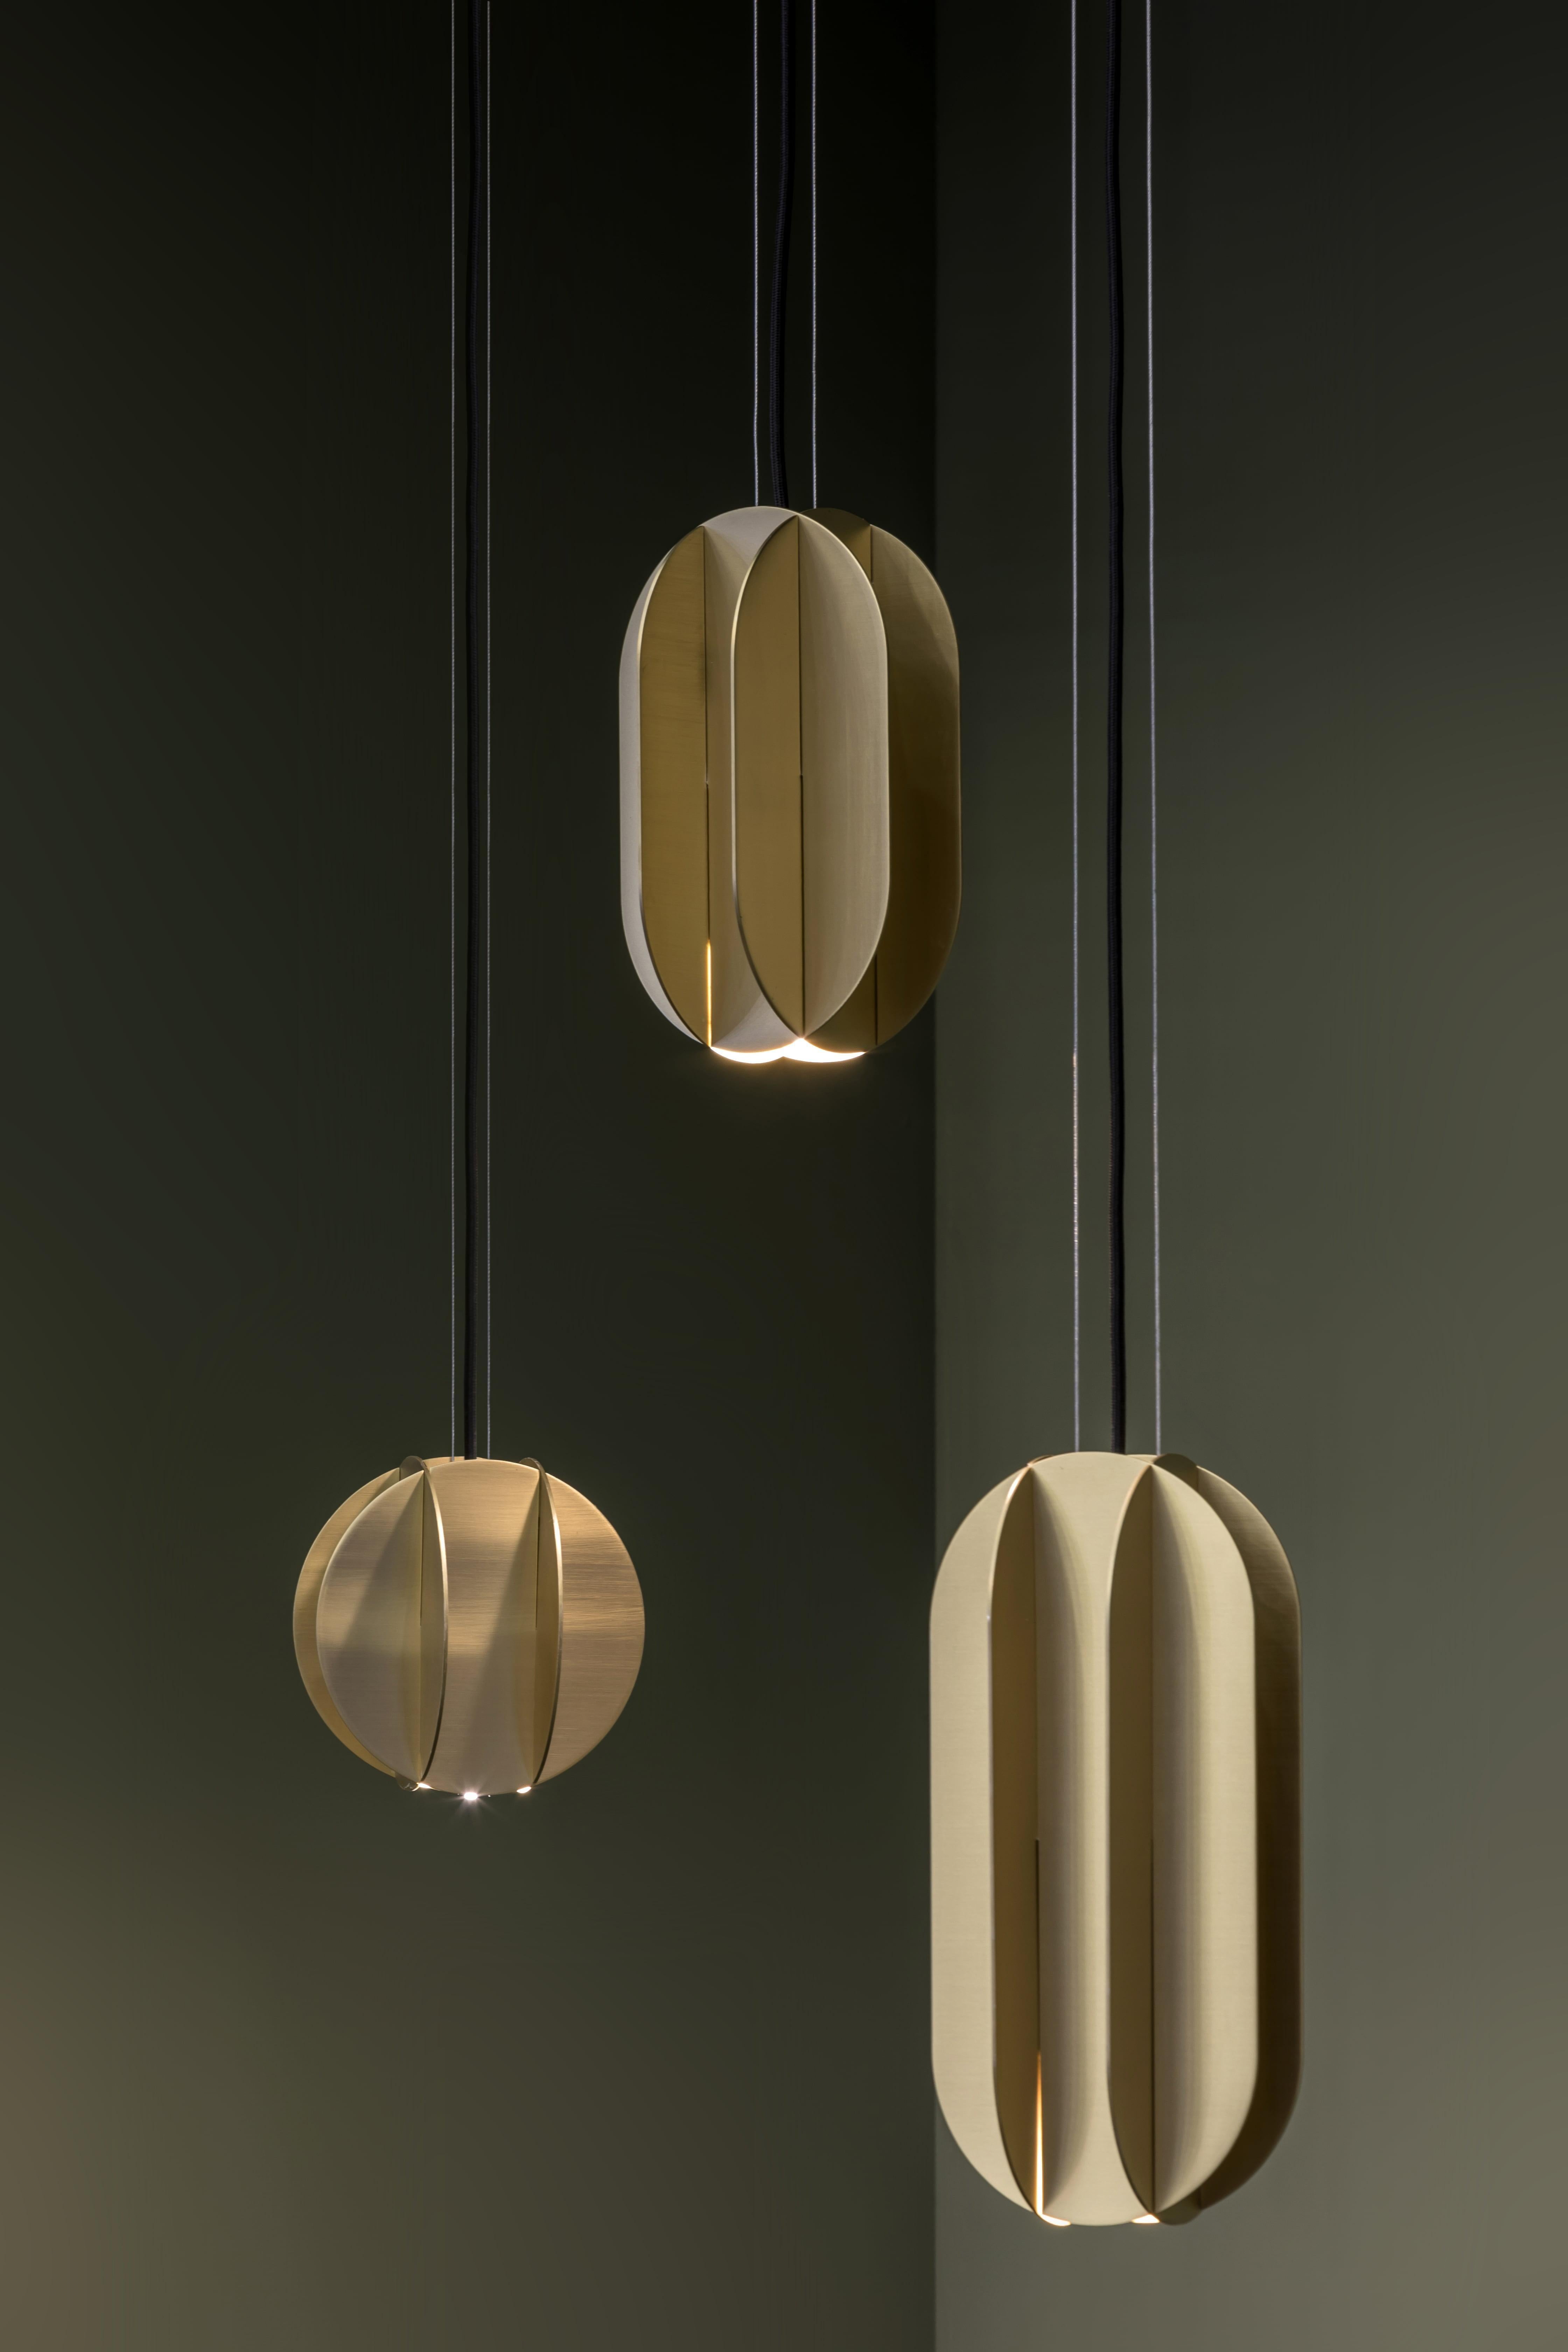 Brand: NOOM
Designer: Kateryna Sokolova
Materials: Brass
Dimensions: H 24 cm x W 15 cm x D 15 cm
Net Weight: 2 kg
Electrification: 2 × LED G9 10W.

EL collection of lighting is inspired by the geometric works of the great Suprematist artists El